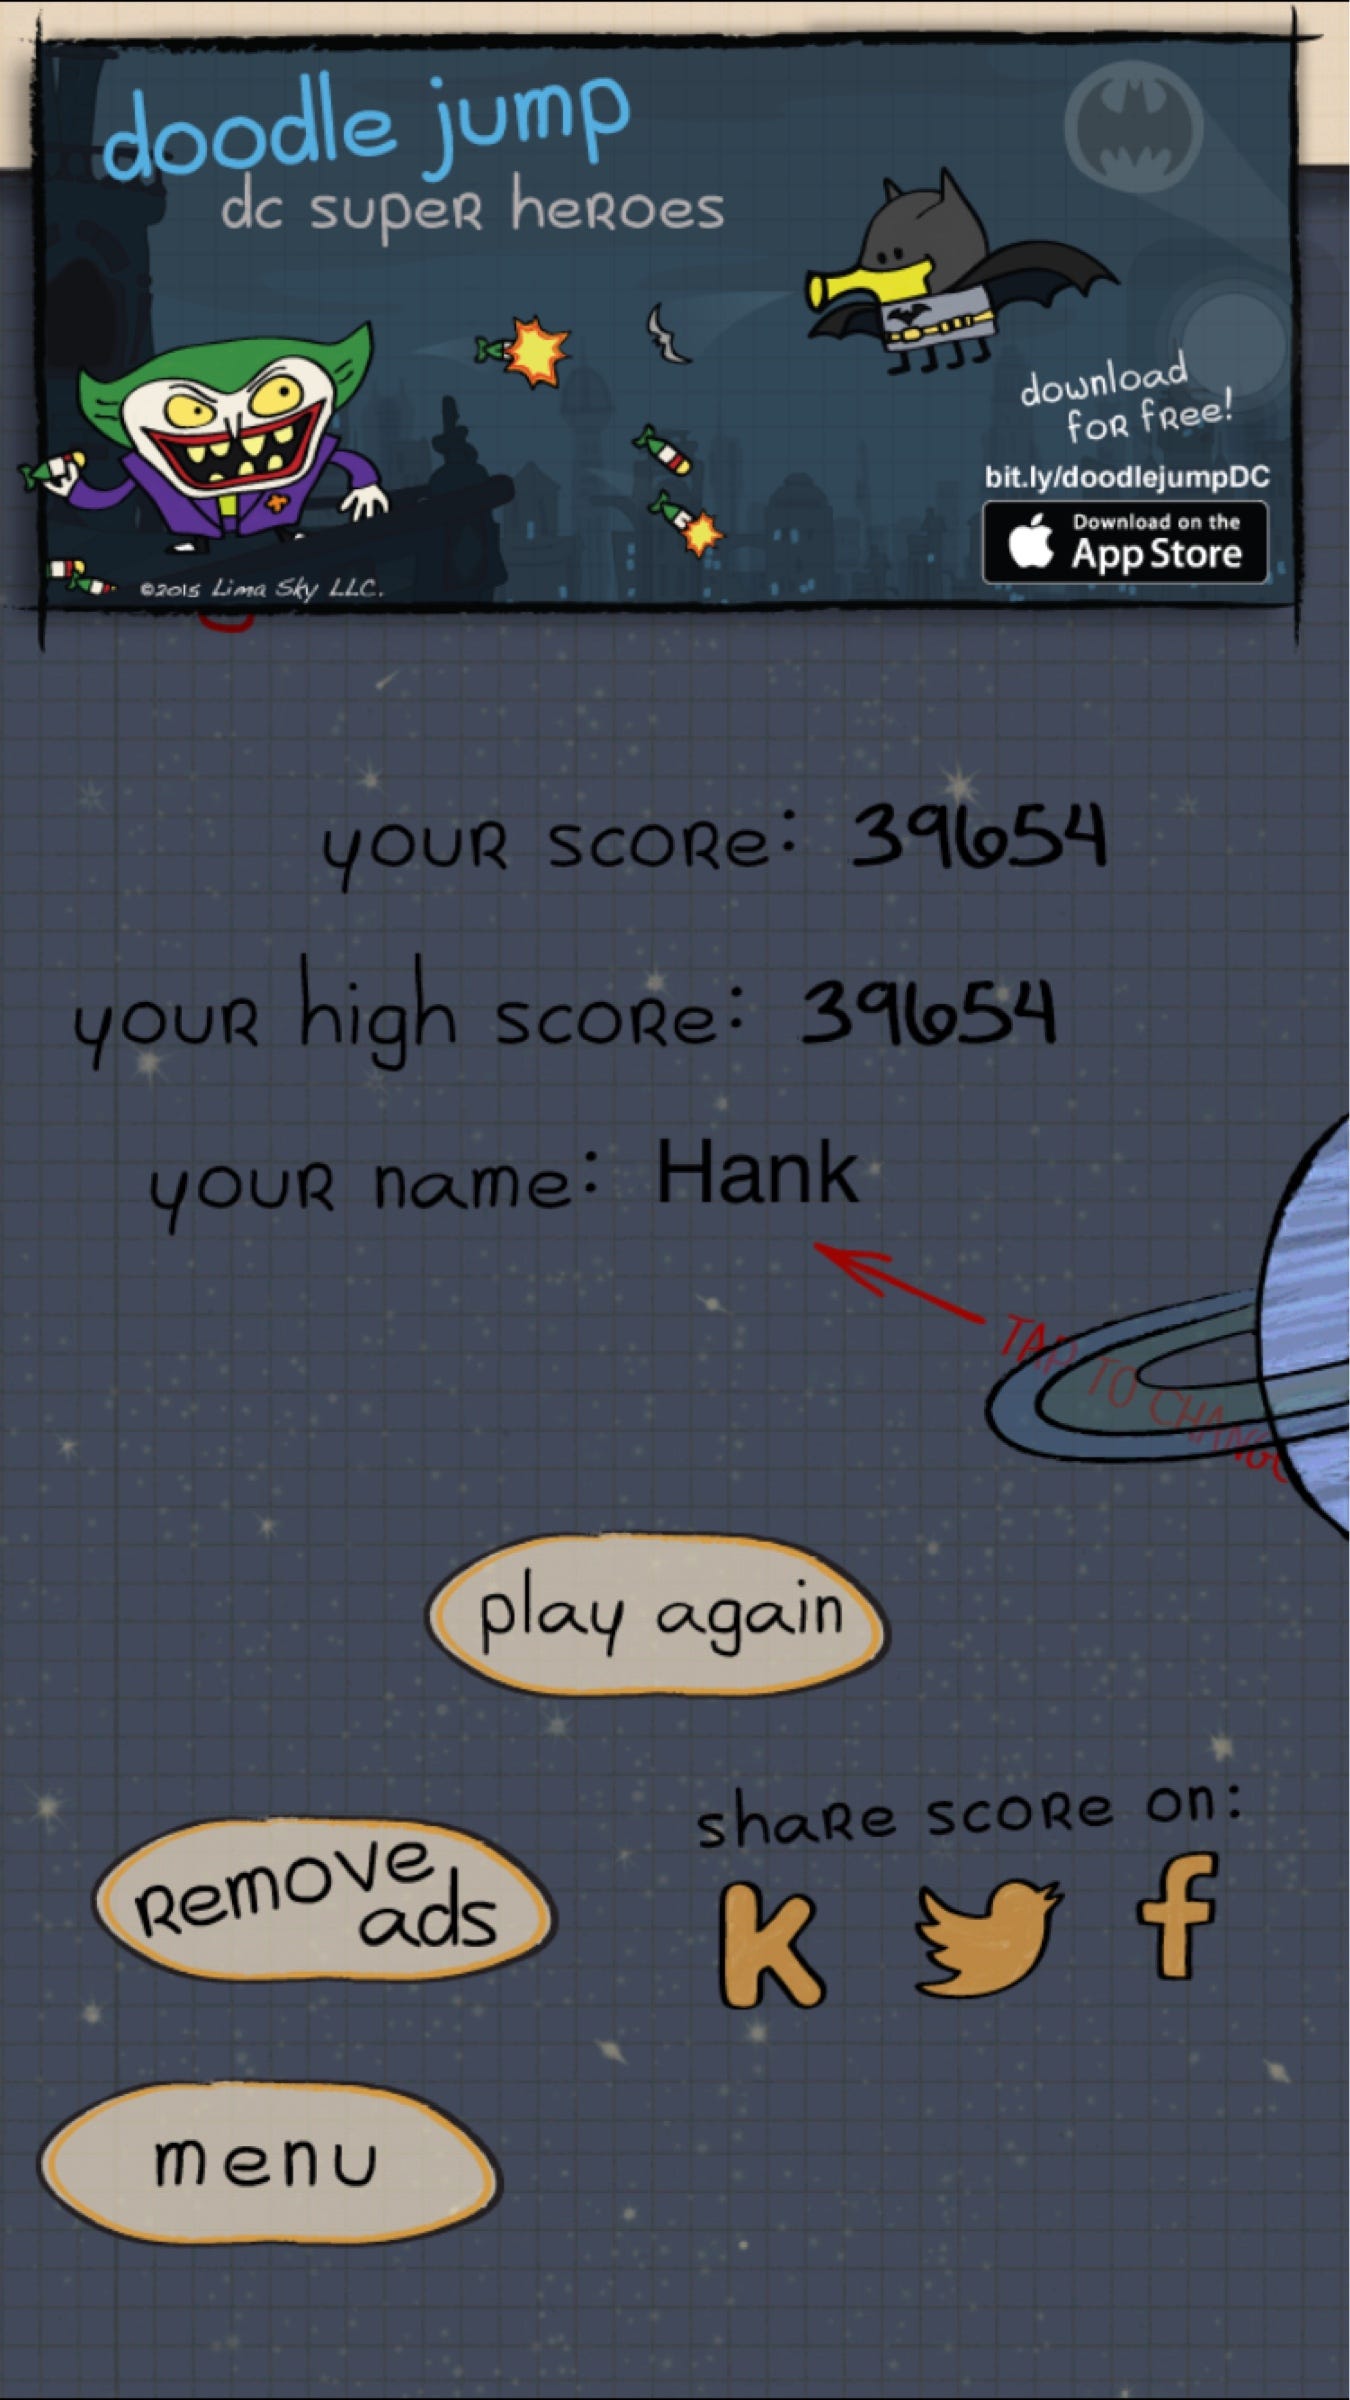 New high score in doodle jump!. Can't believe it's true!!!, by 賴繹傑